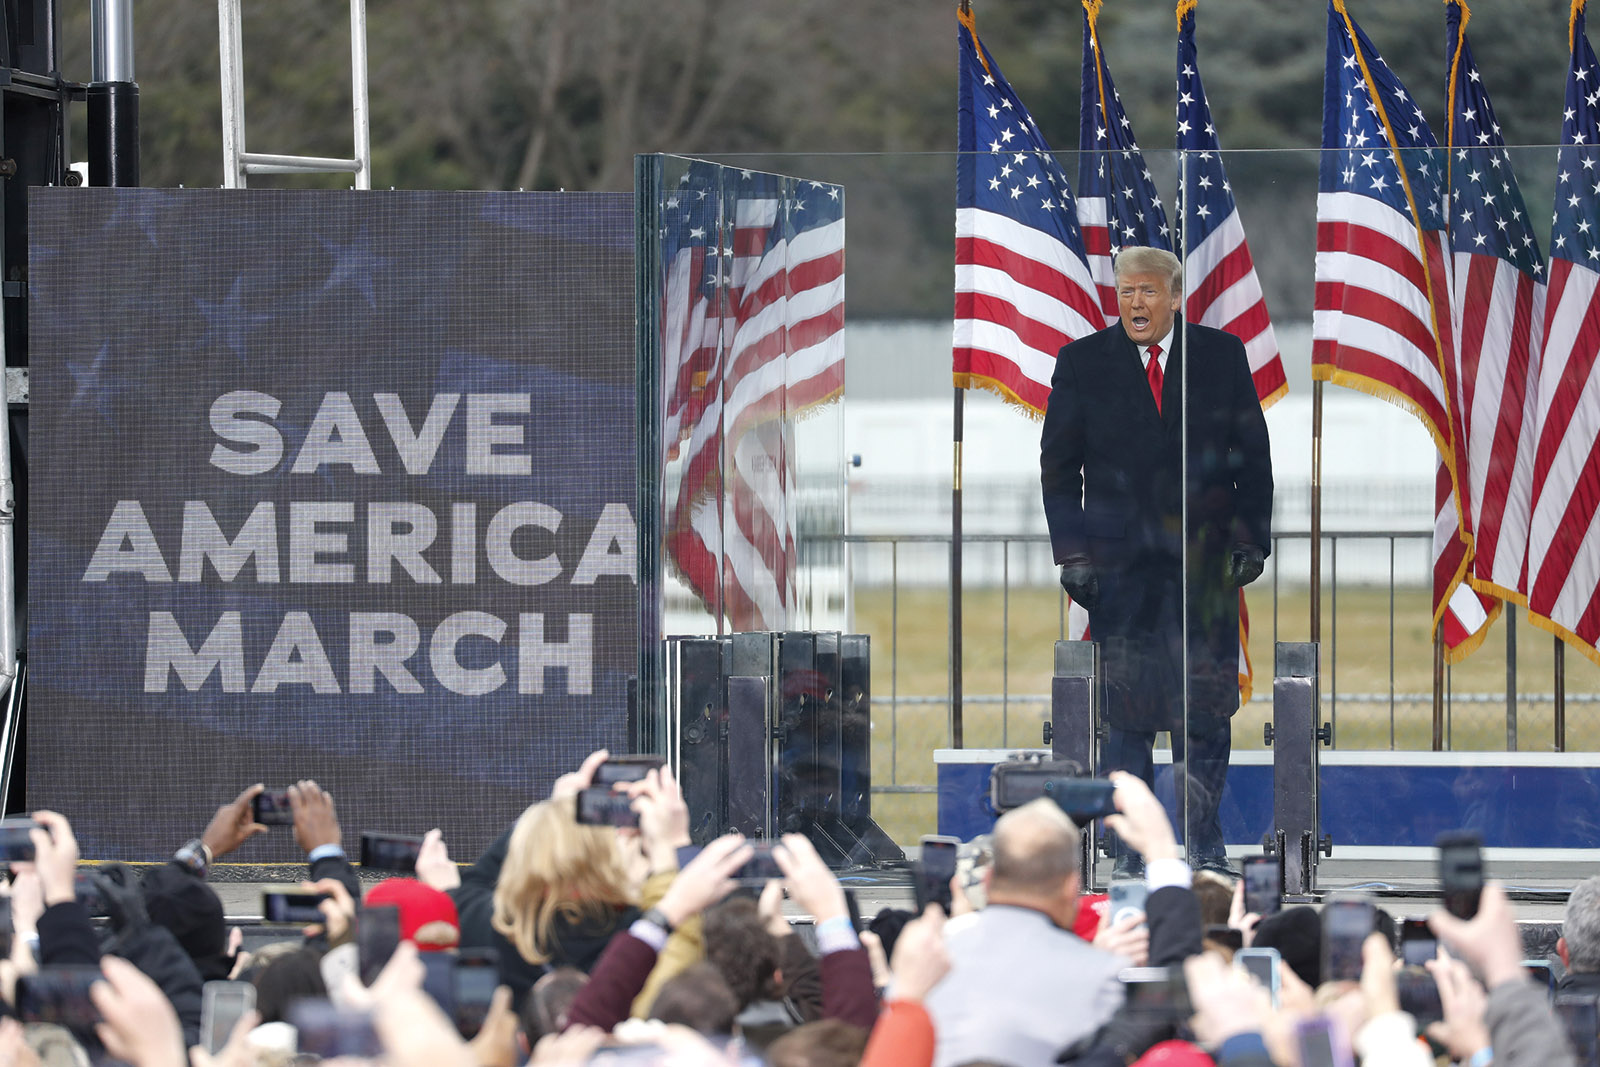 Donald Trump at the rally at the Ellipse, Washington, D.C., January 6, 2021